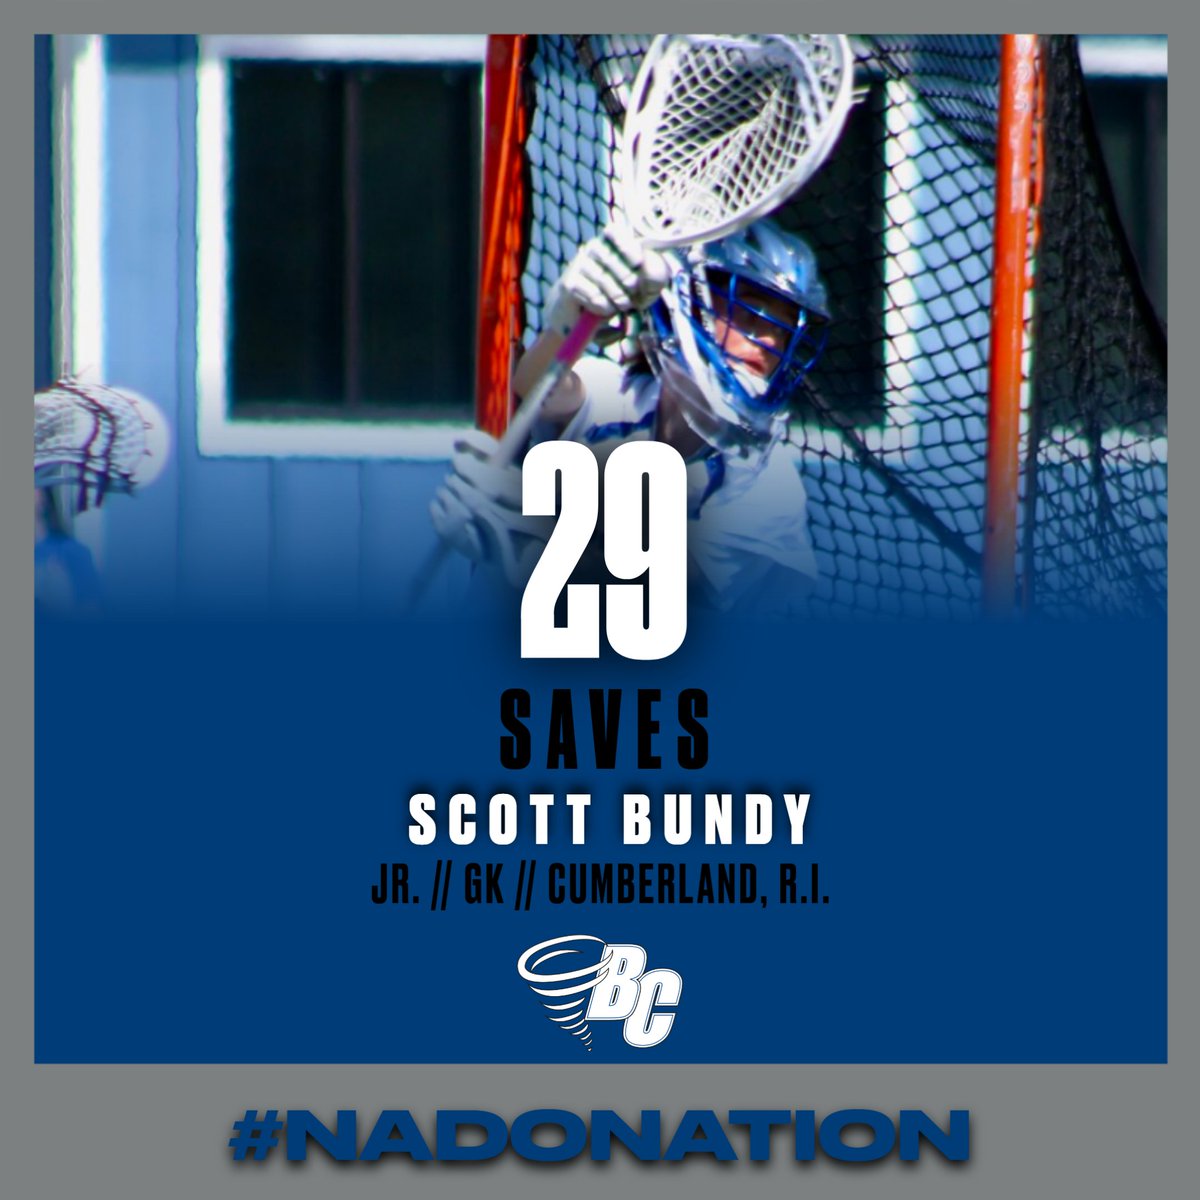 Men's Lacrosse: Congrats to @BrevardCollege @NadosMLax junior goalkeeper Scott Bundy, who today matched a 10-year program single-game record with 29 saves! #NadoNation #d3mlax #d3lax